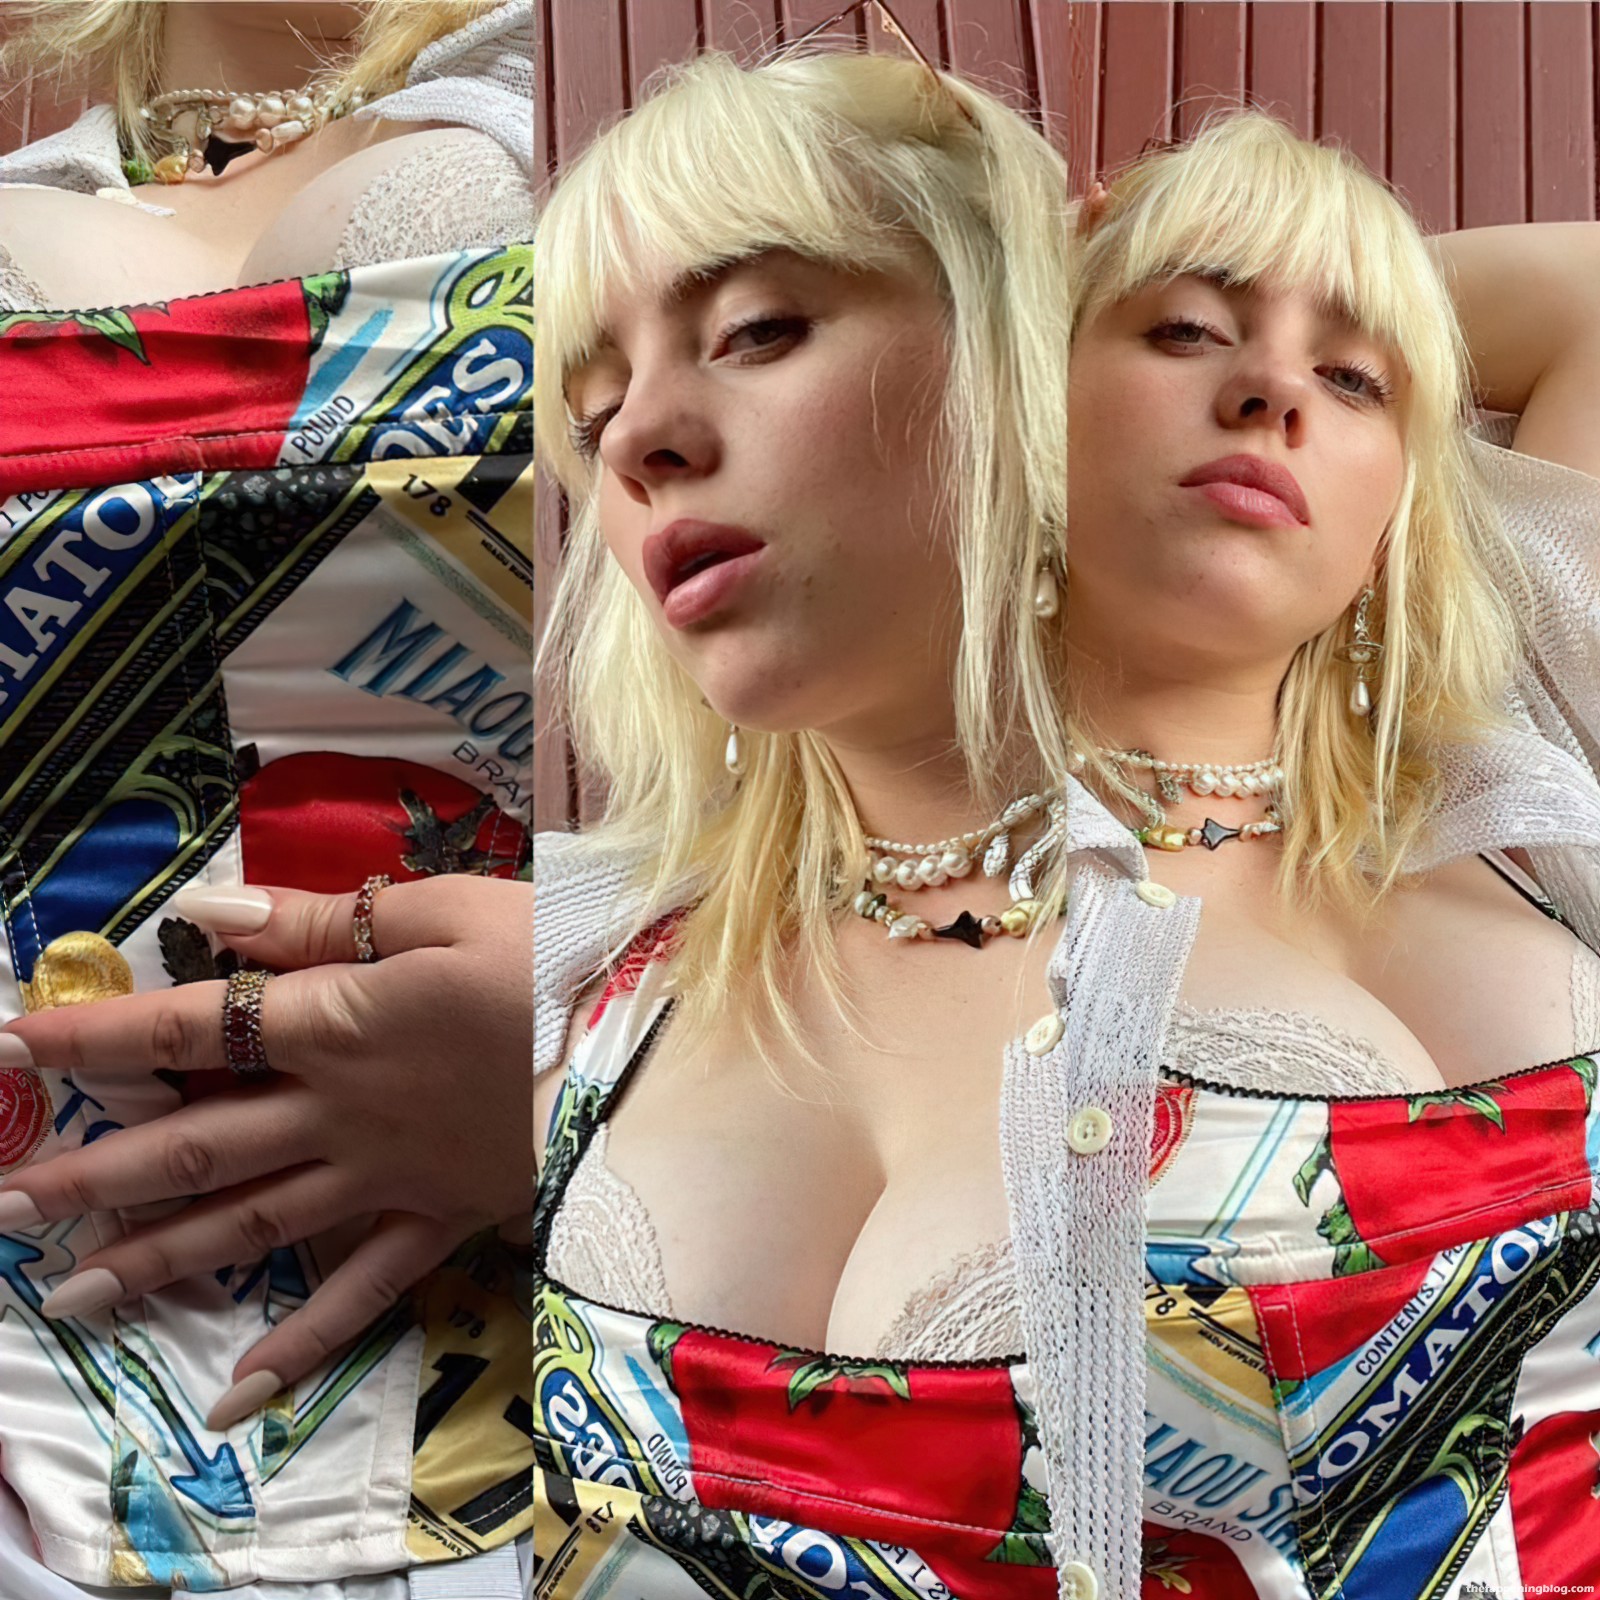 Billie Eilish Nude, The Fappening - Photo #1318562 - FappeningBook